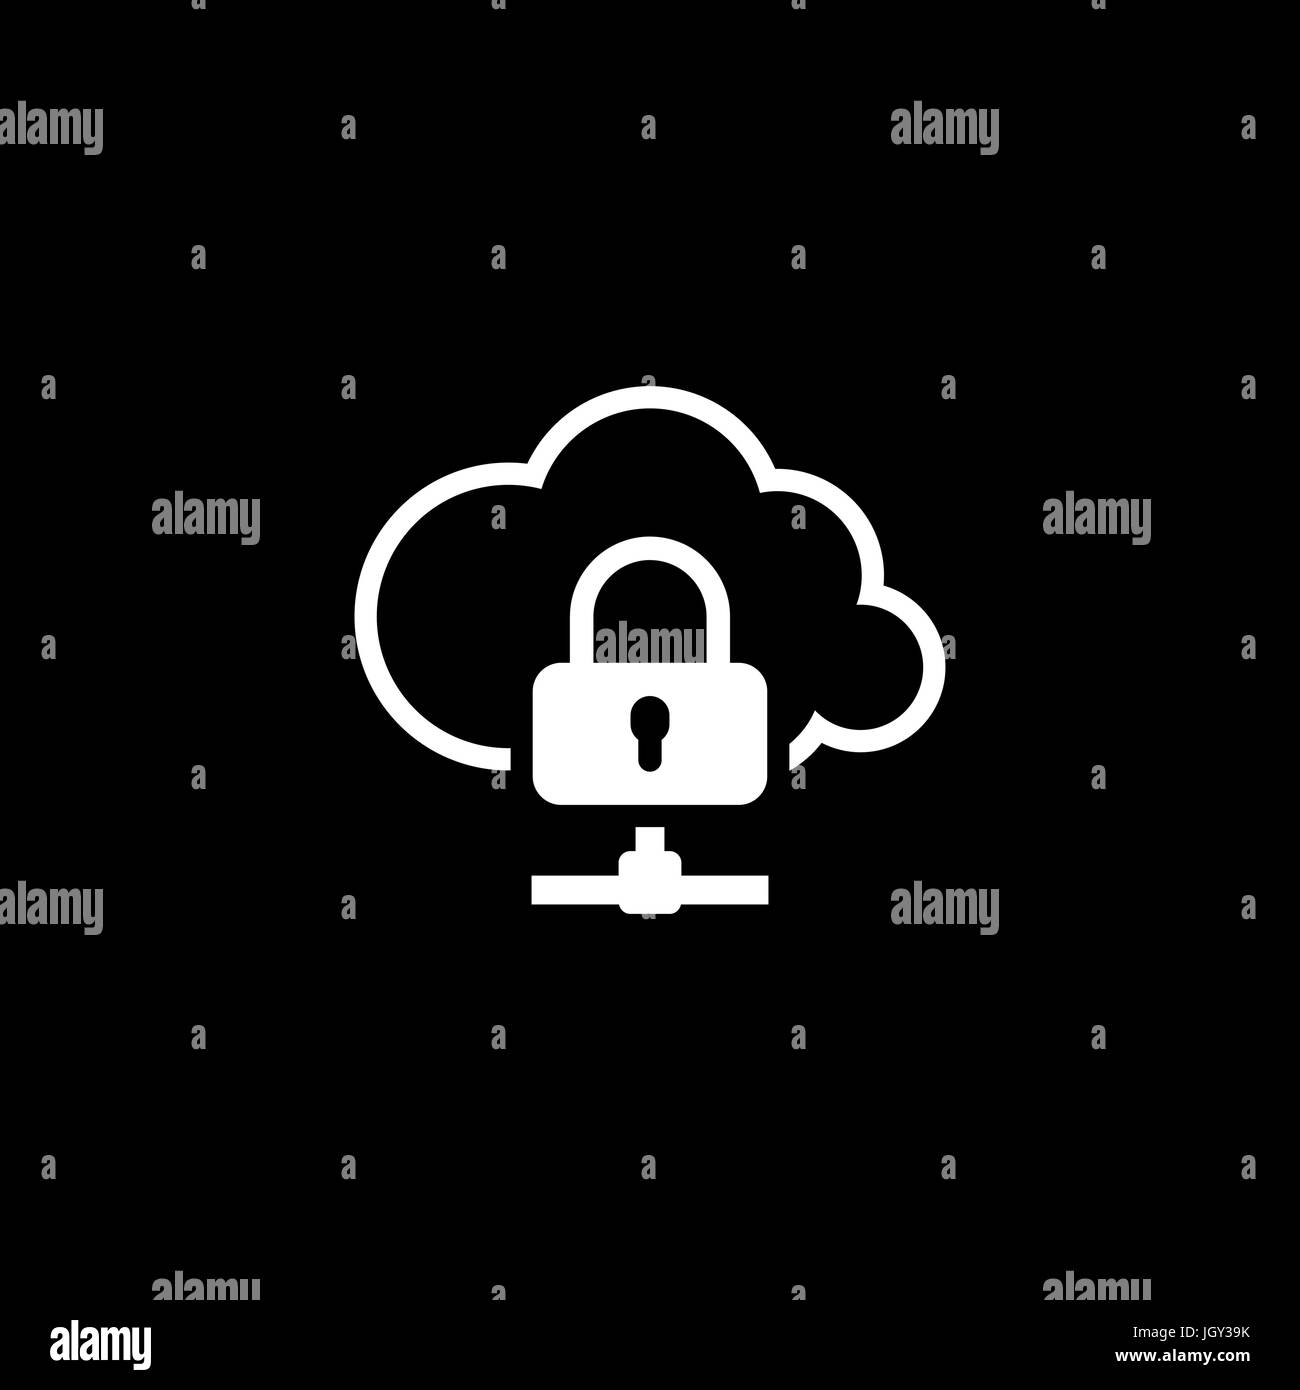 Cloud Data Protection Icon. Flat Design. Stock Vector